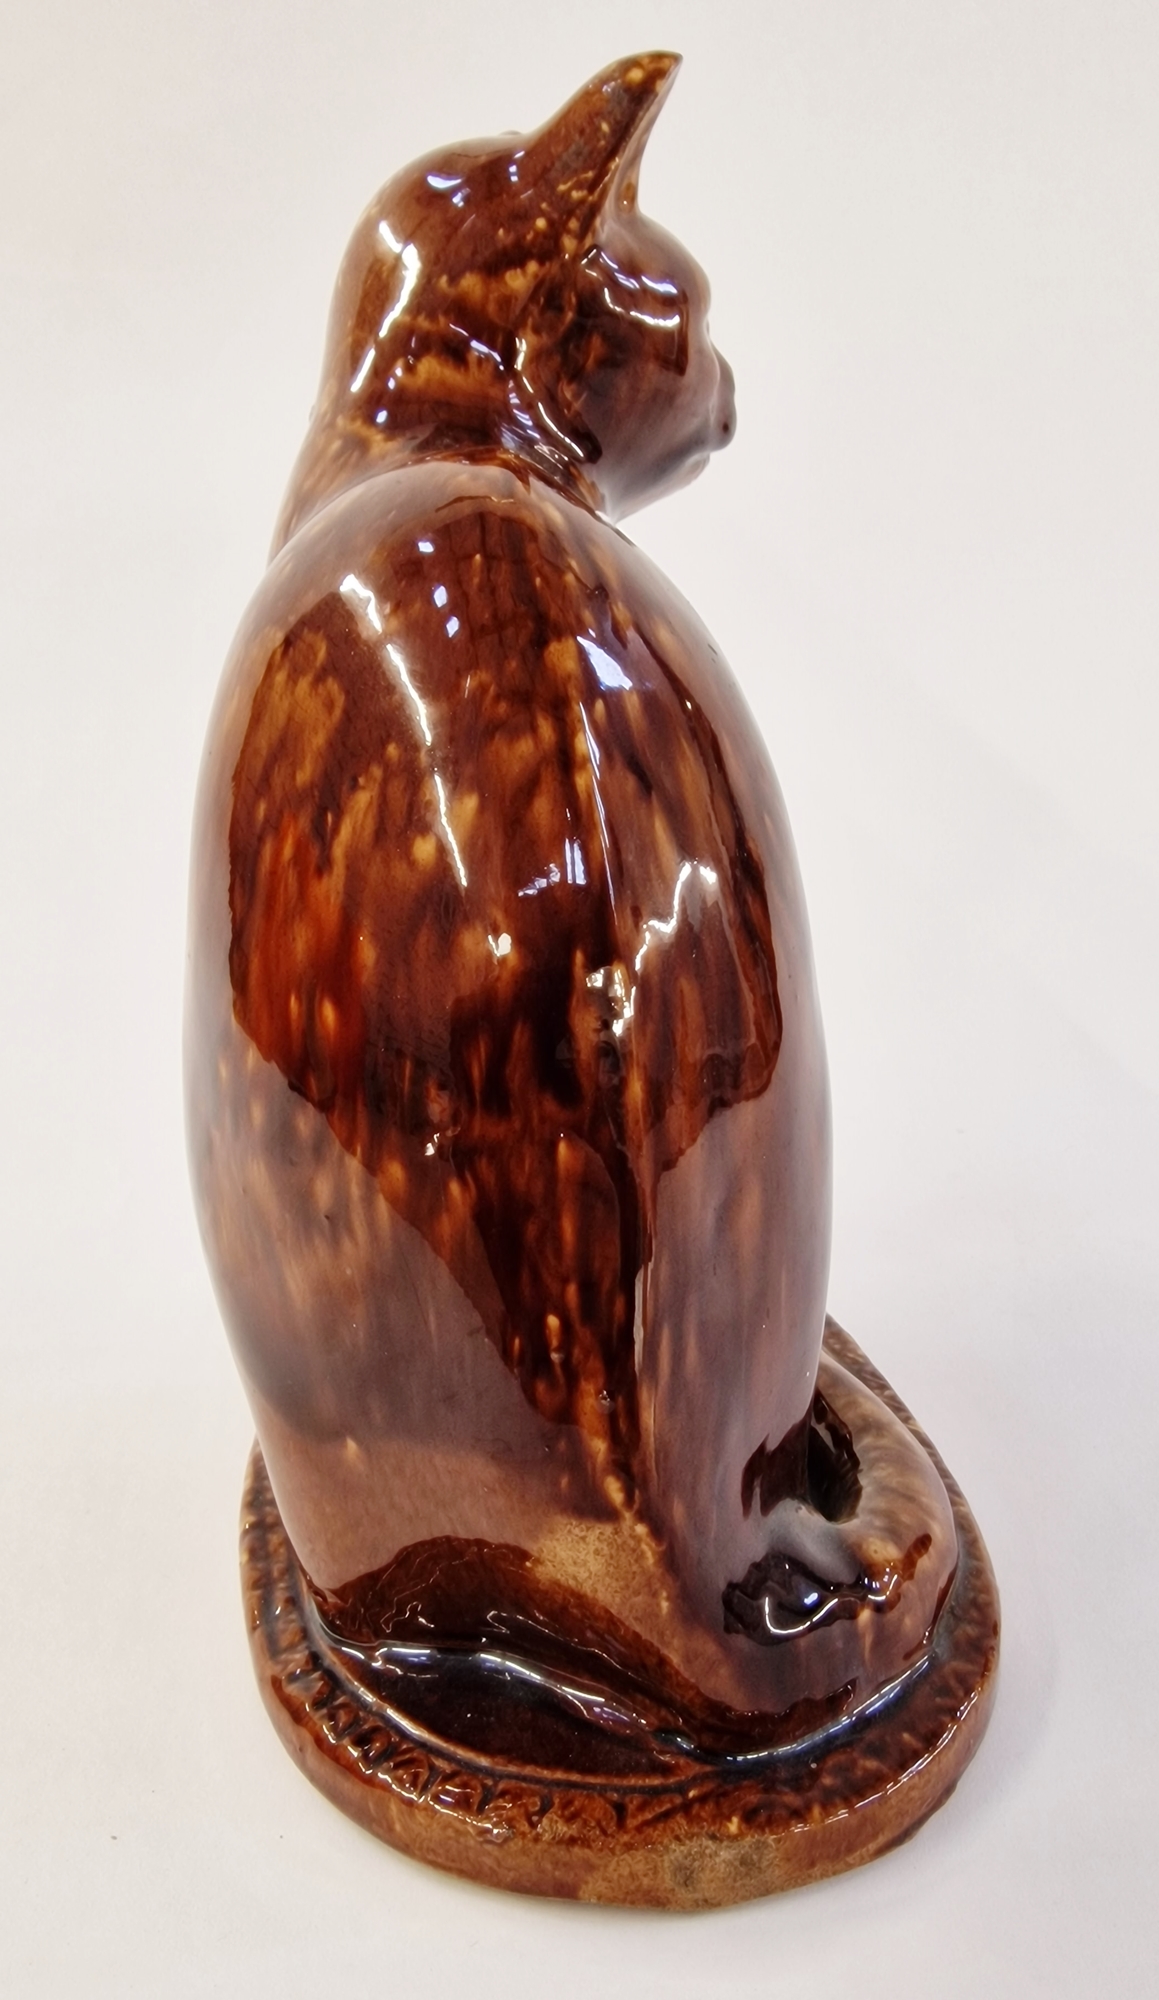 20th century pottery model of a cat, enriched in mottled brown Whieldon-style glaze, modelled seated - Image 4 of 4